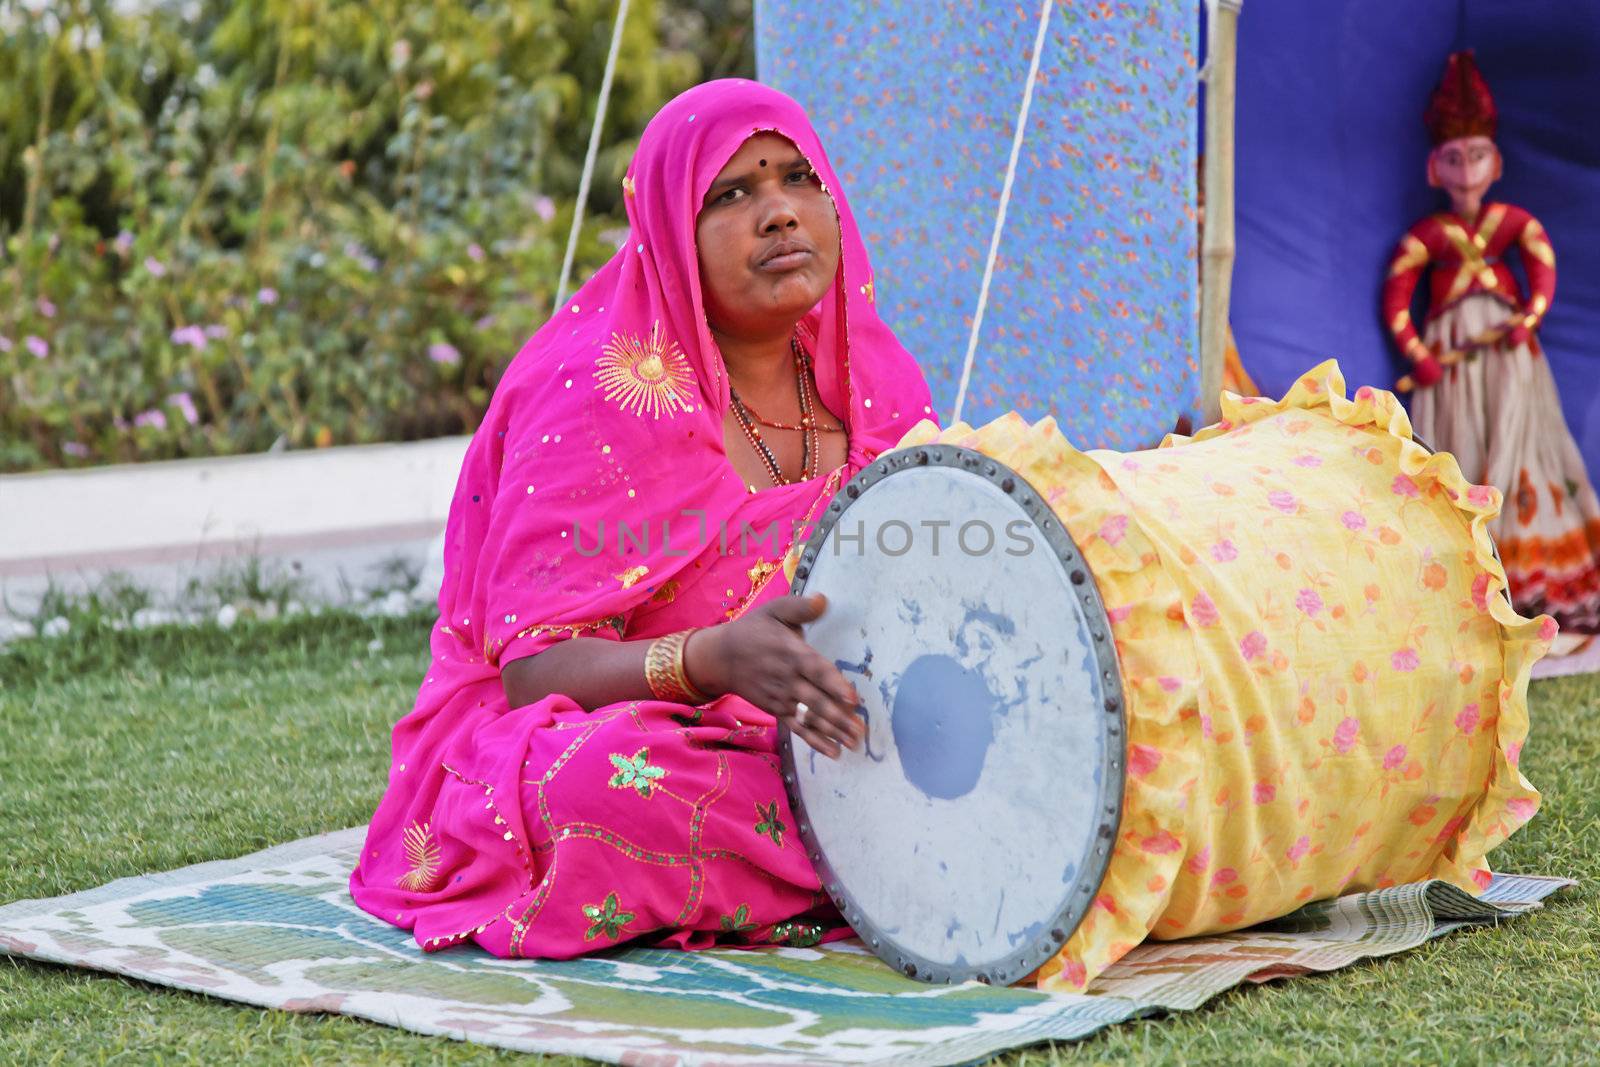 Indian lady performer of folk lore stories as part of a husband and wife team in Rajasthan India